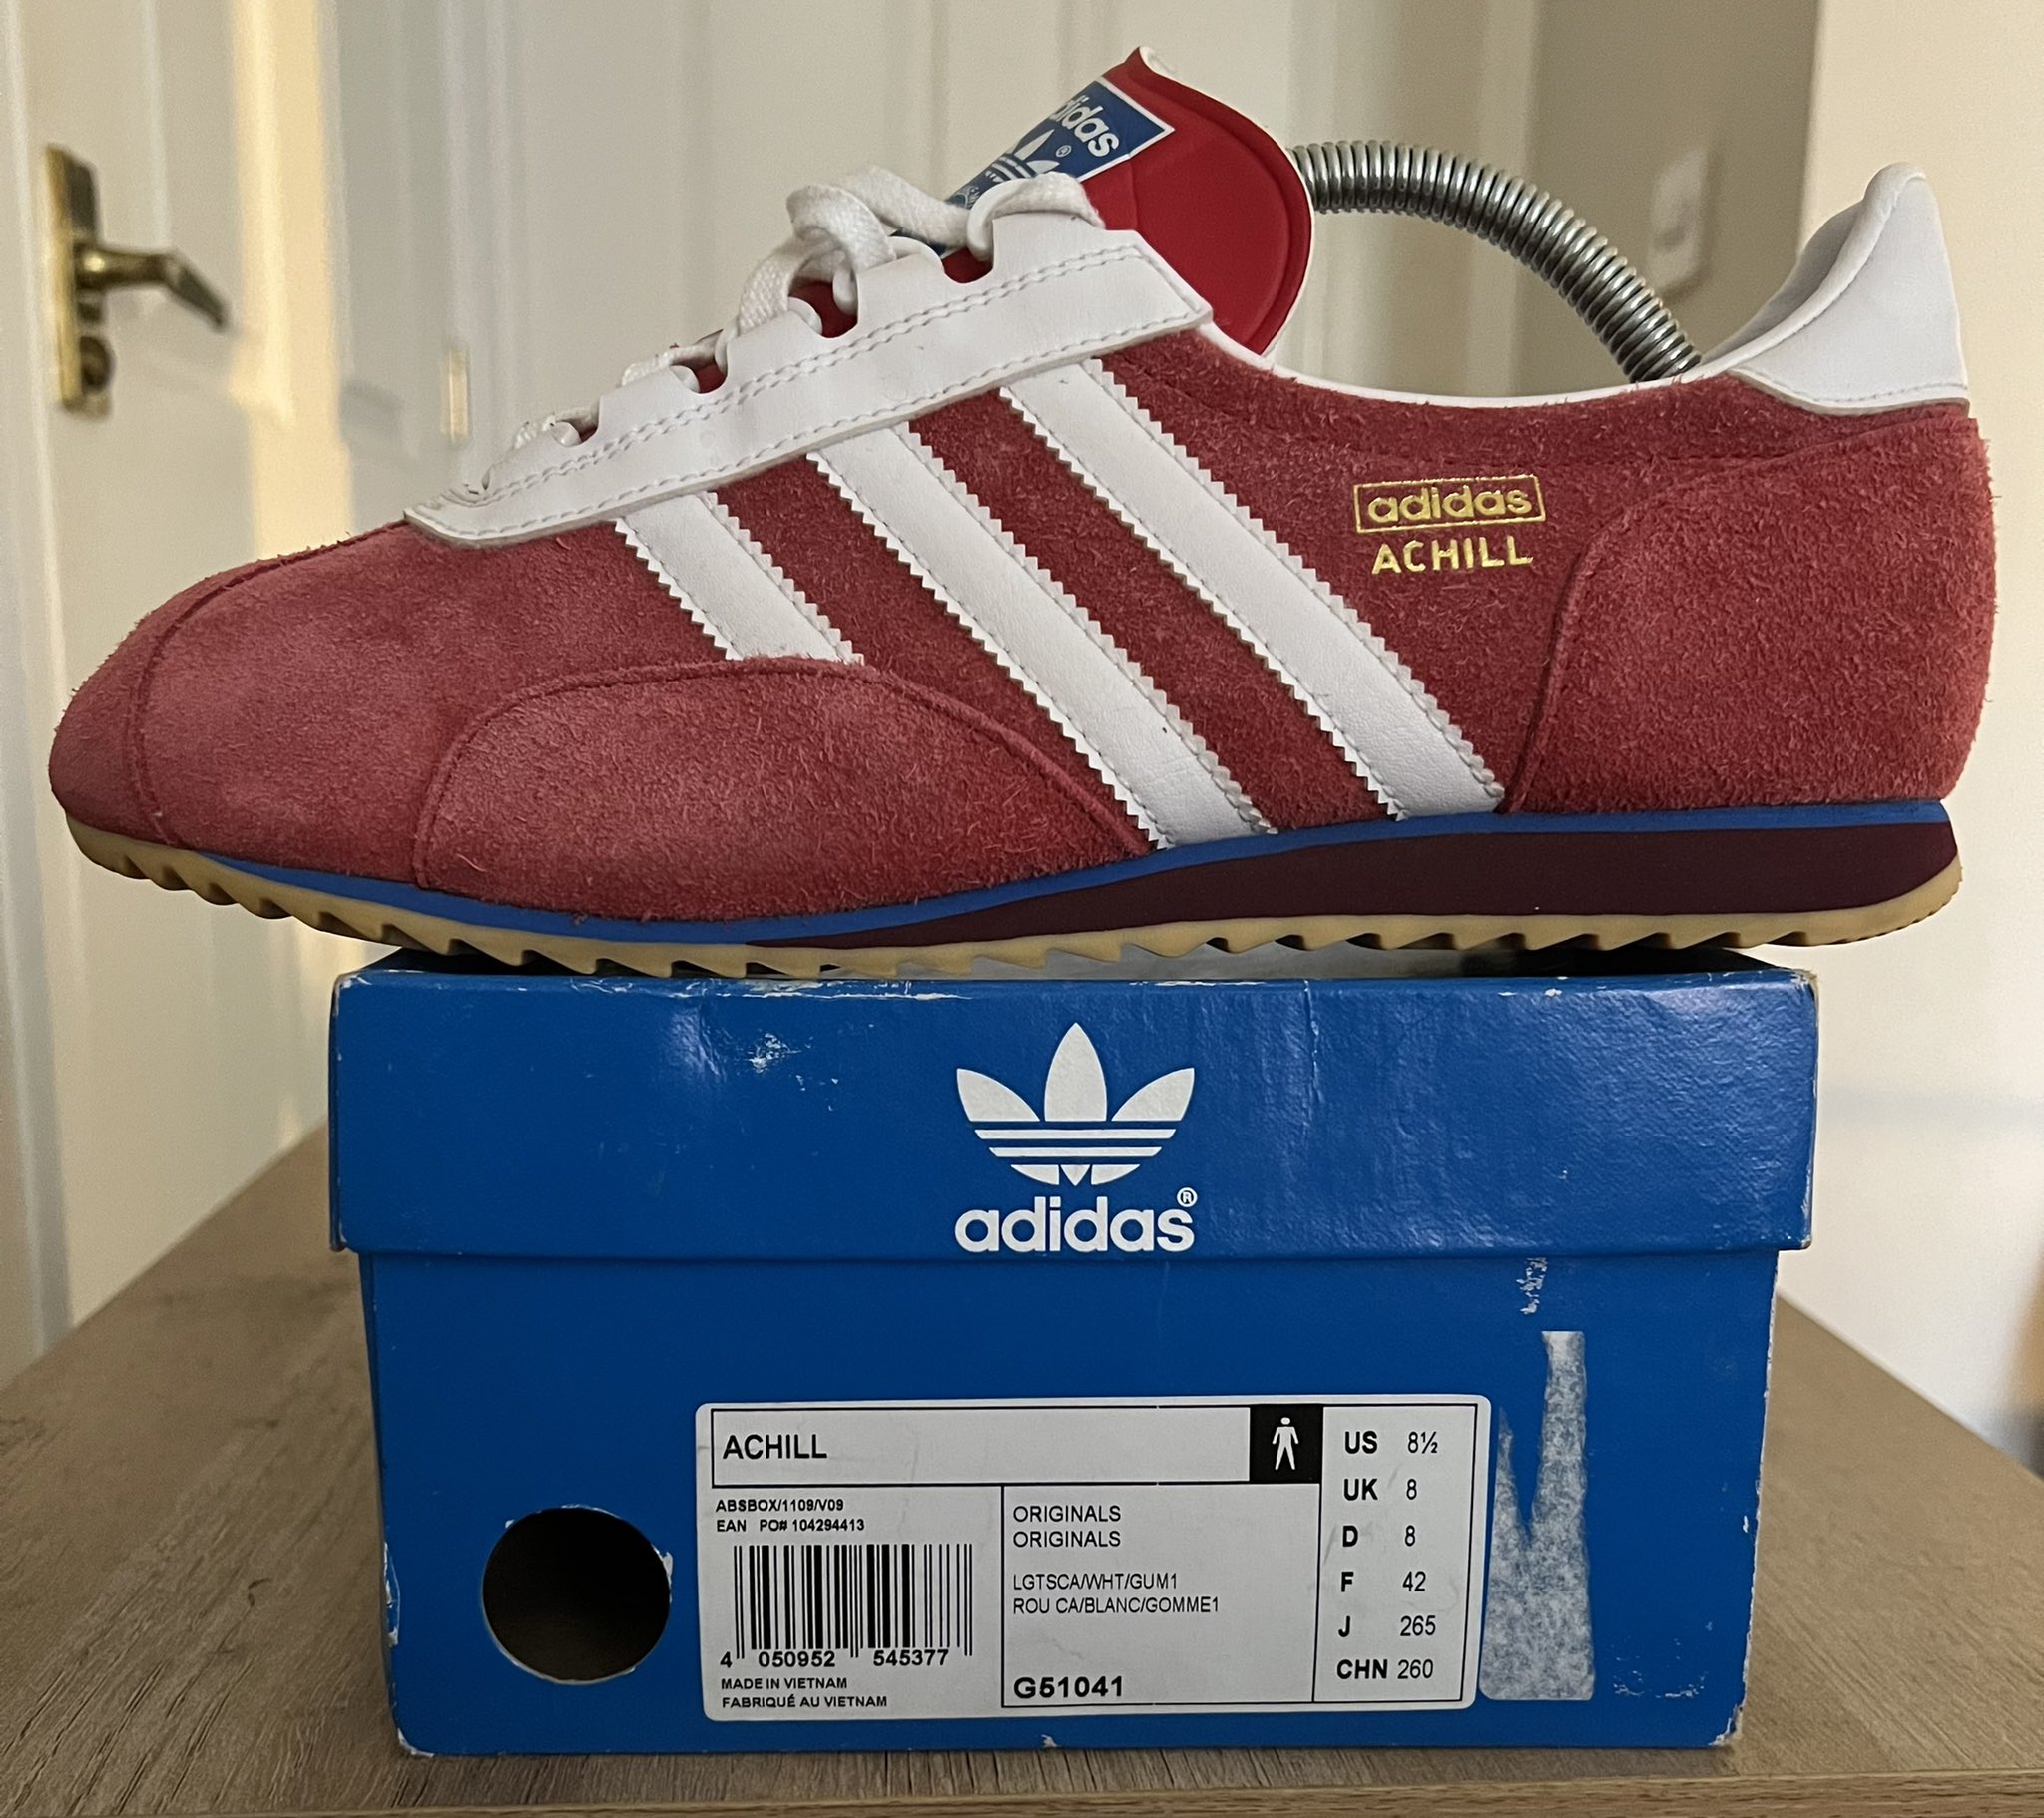 P_KOVS on Twitter: "🔥🔥🔥🔥FOR SALE🔥🔥🔥🔥 adidas Achill from 07/11 - size BNIB ( no tags unfortunately) Looking get back what I paid £140 TYD - maybe open to very sensible